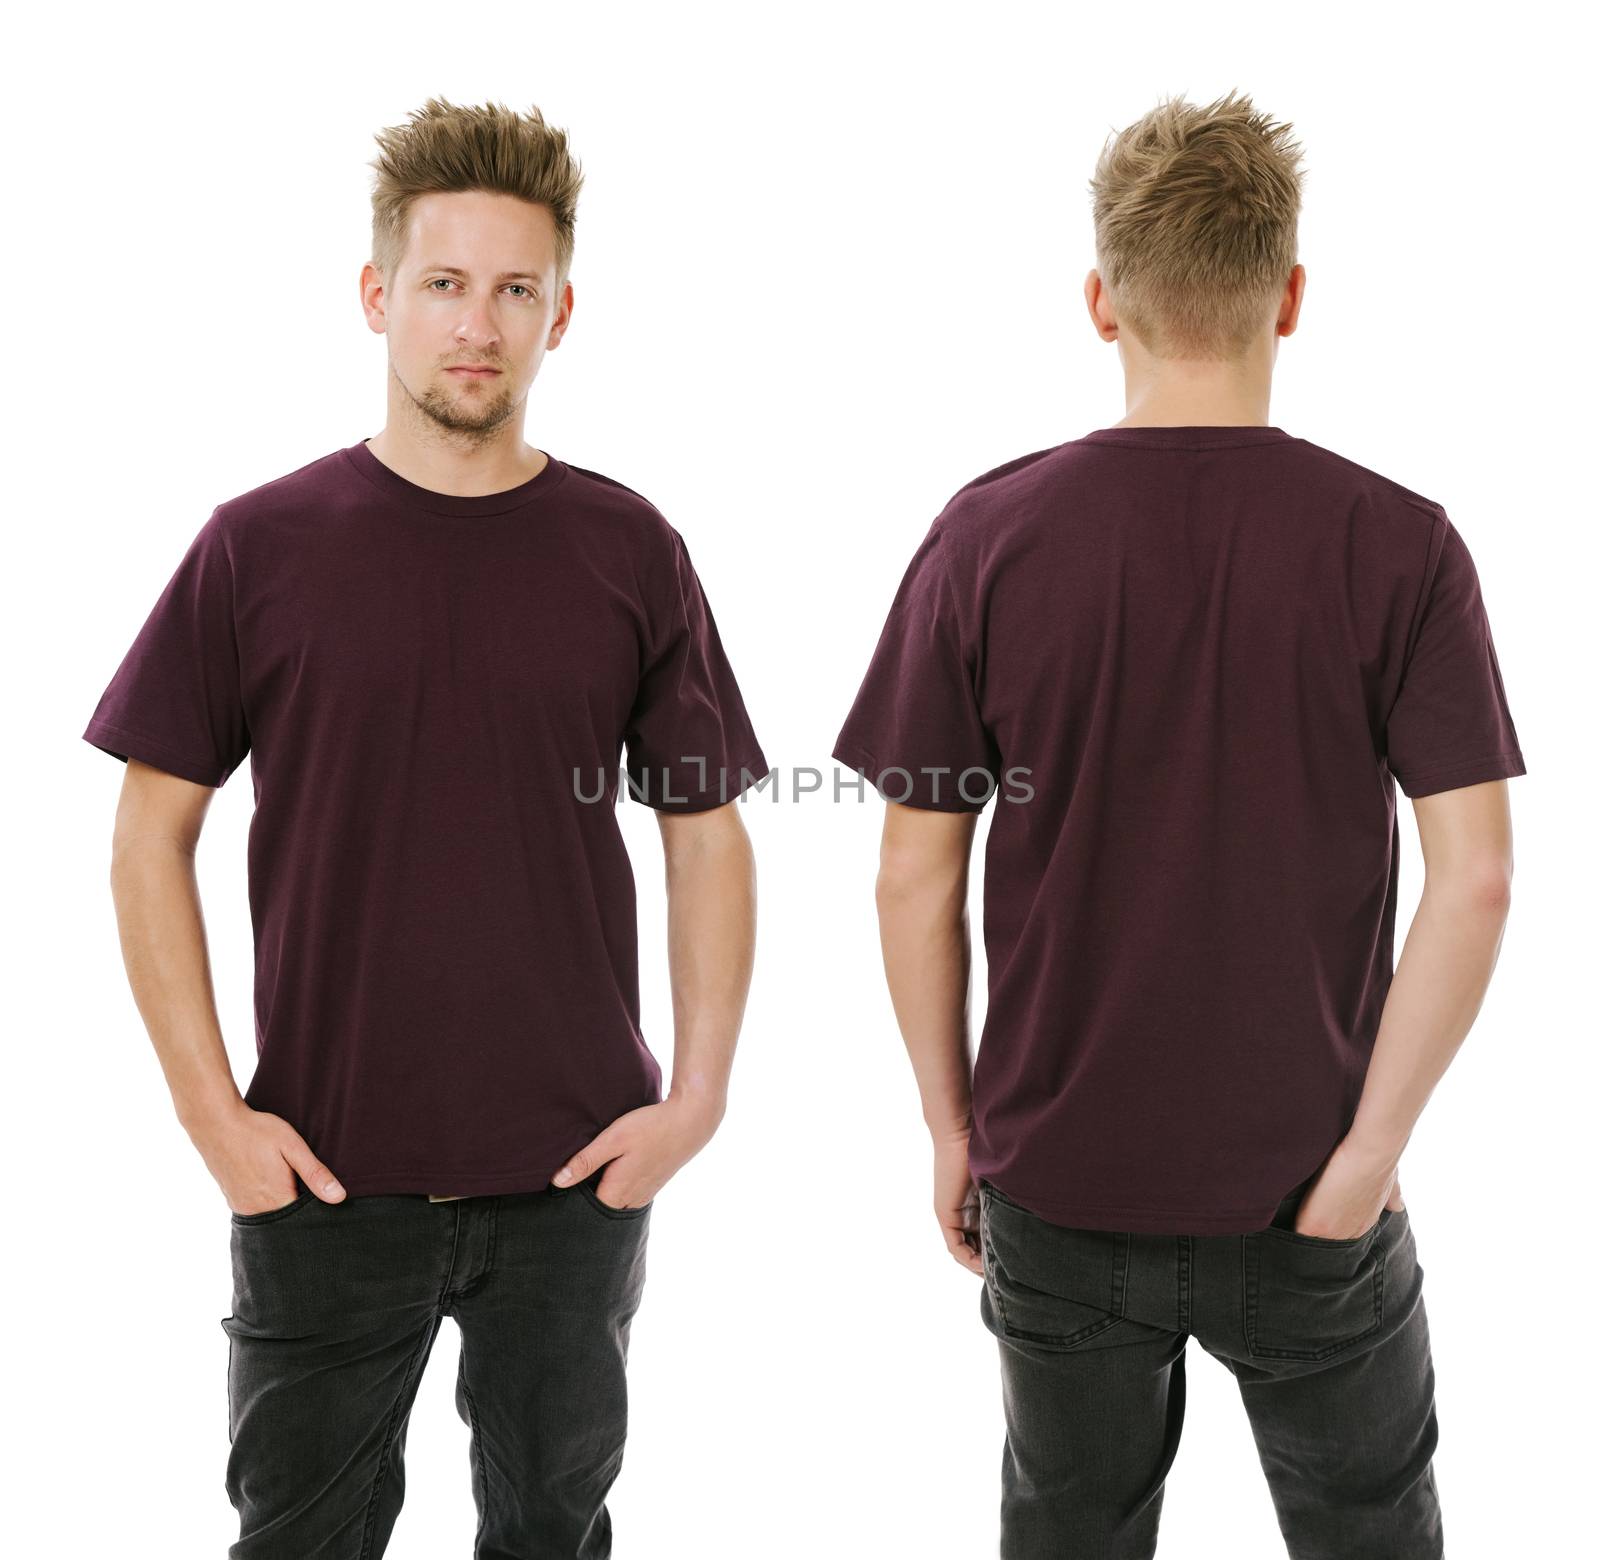 Photo of a man wearing blank navy blue t-shirt, front and back. Ready for your design or artwork.